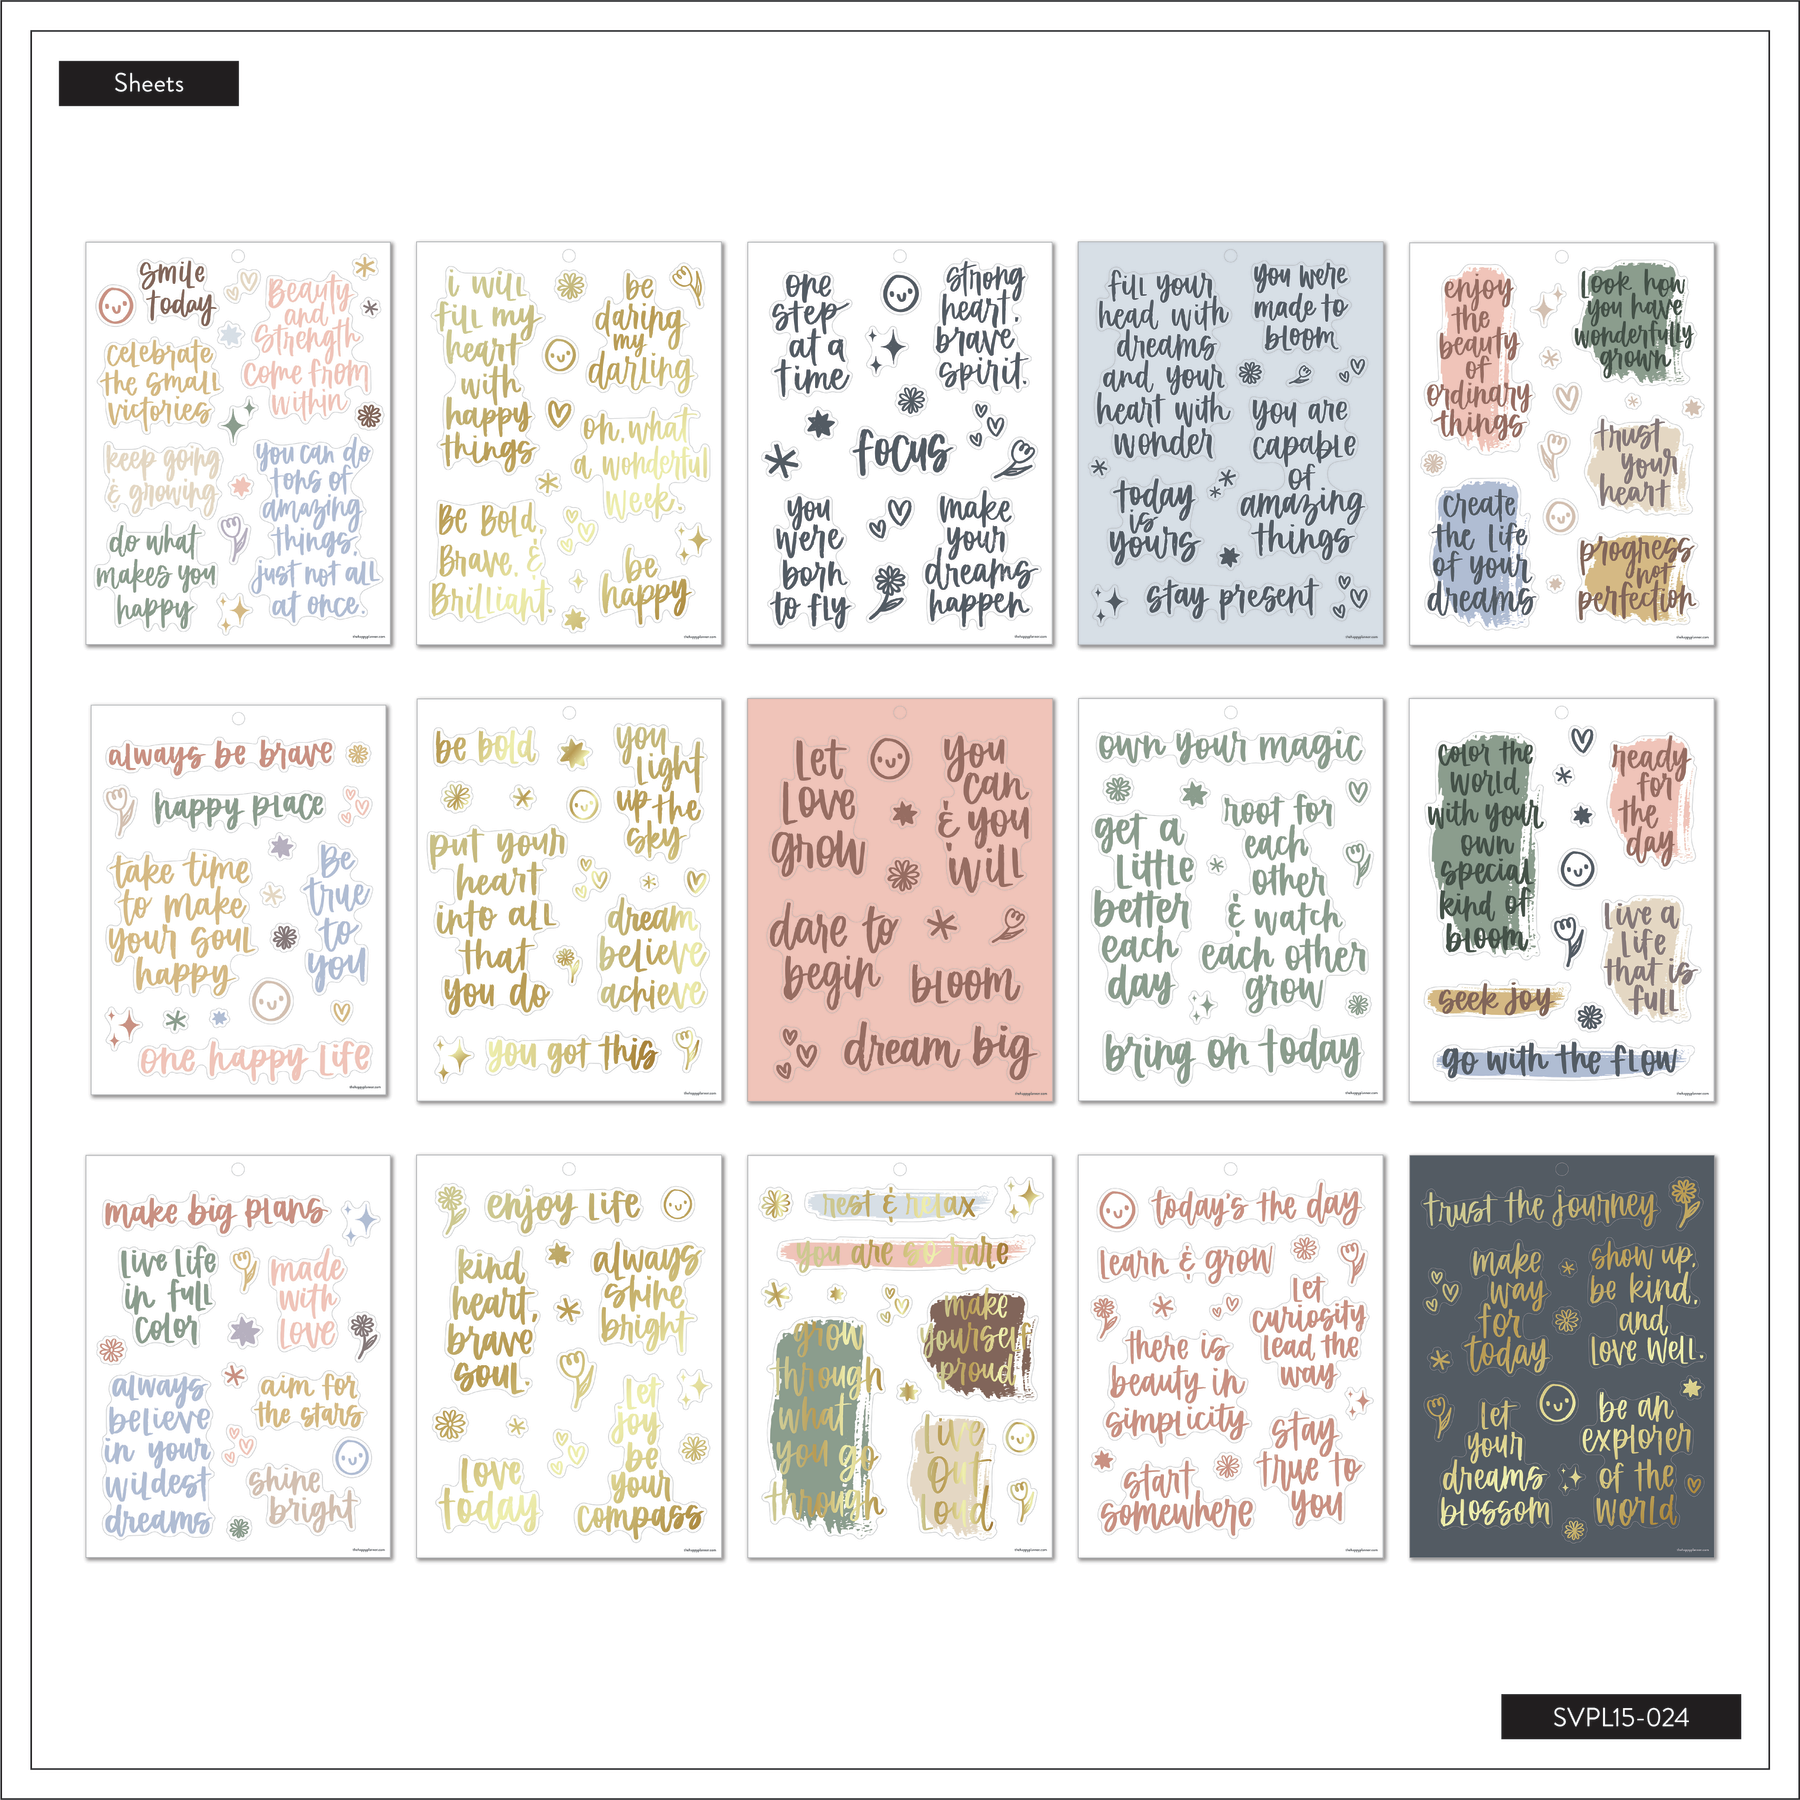 Happy Planner Stickers 9 18 x 4 1316 Everyday Reminders Pack Of 5 Sticker  Sheets - Office Depot